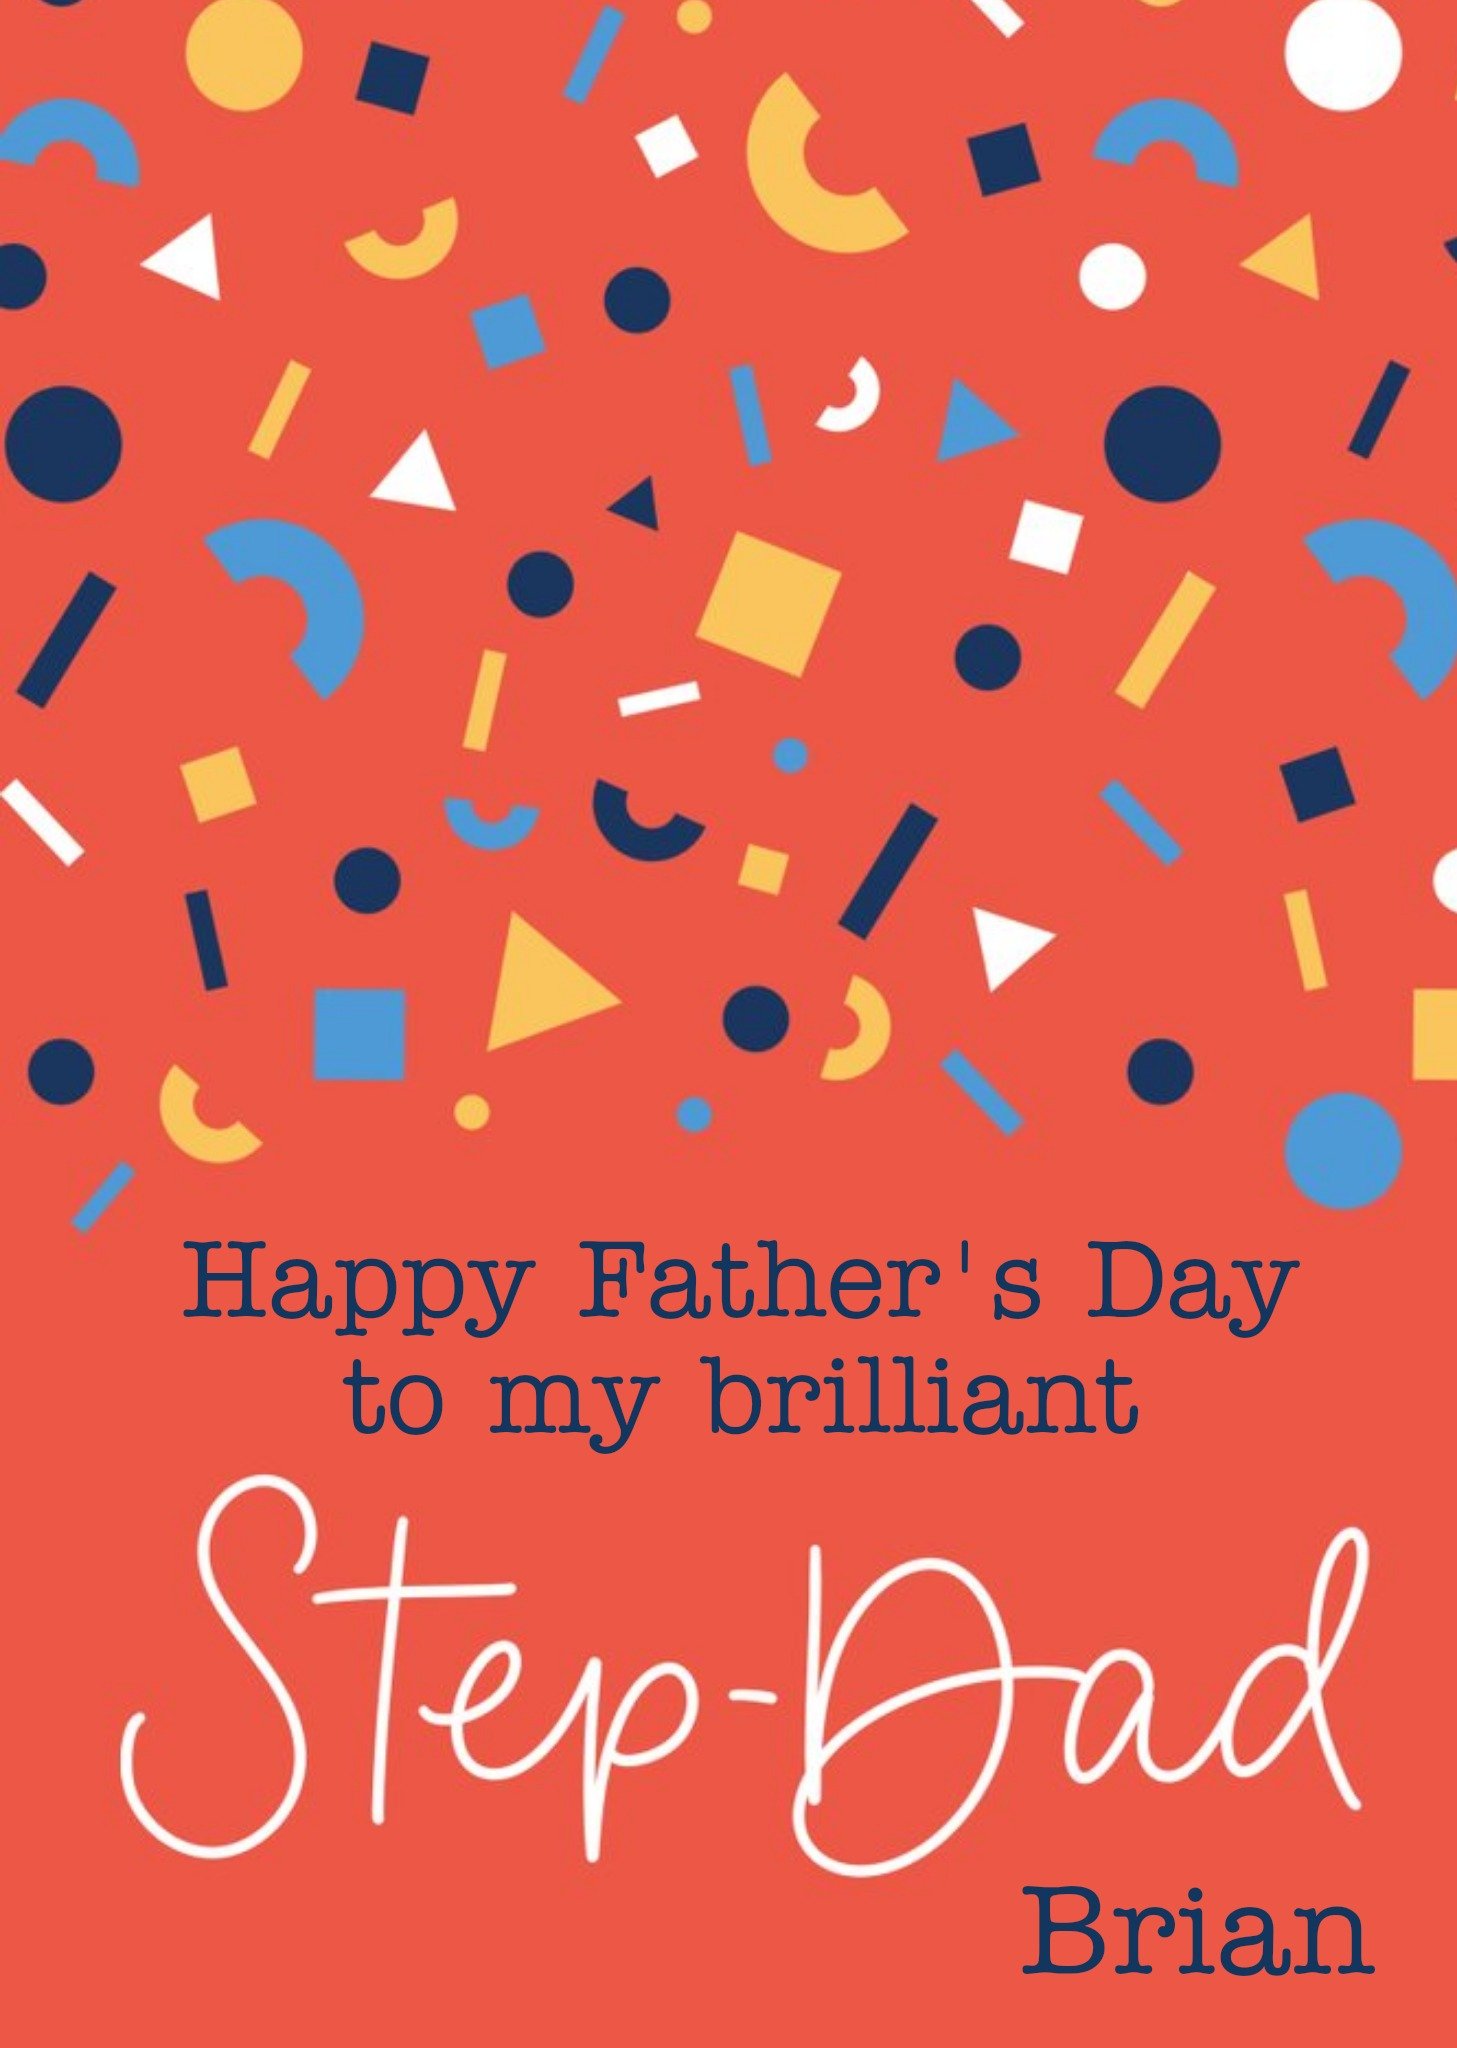 Moonpig Abstract Confetti Brilliant Step Dad Father's Day Card Ecard